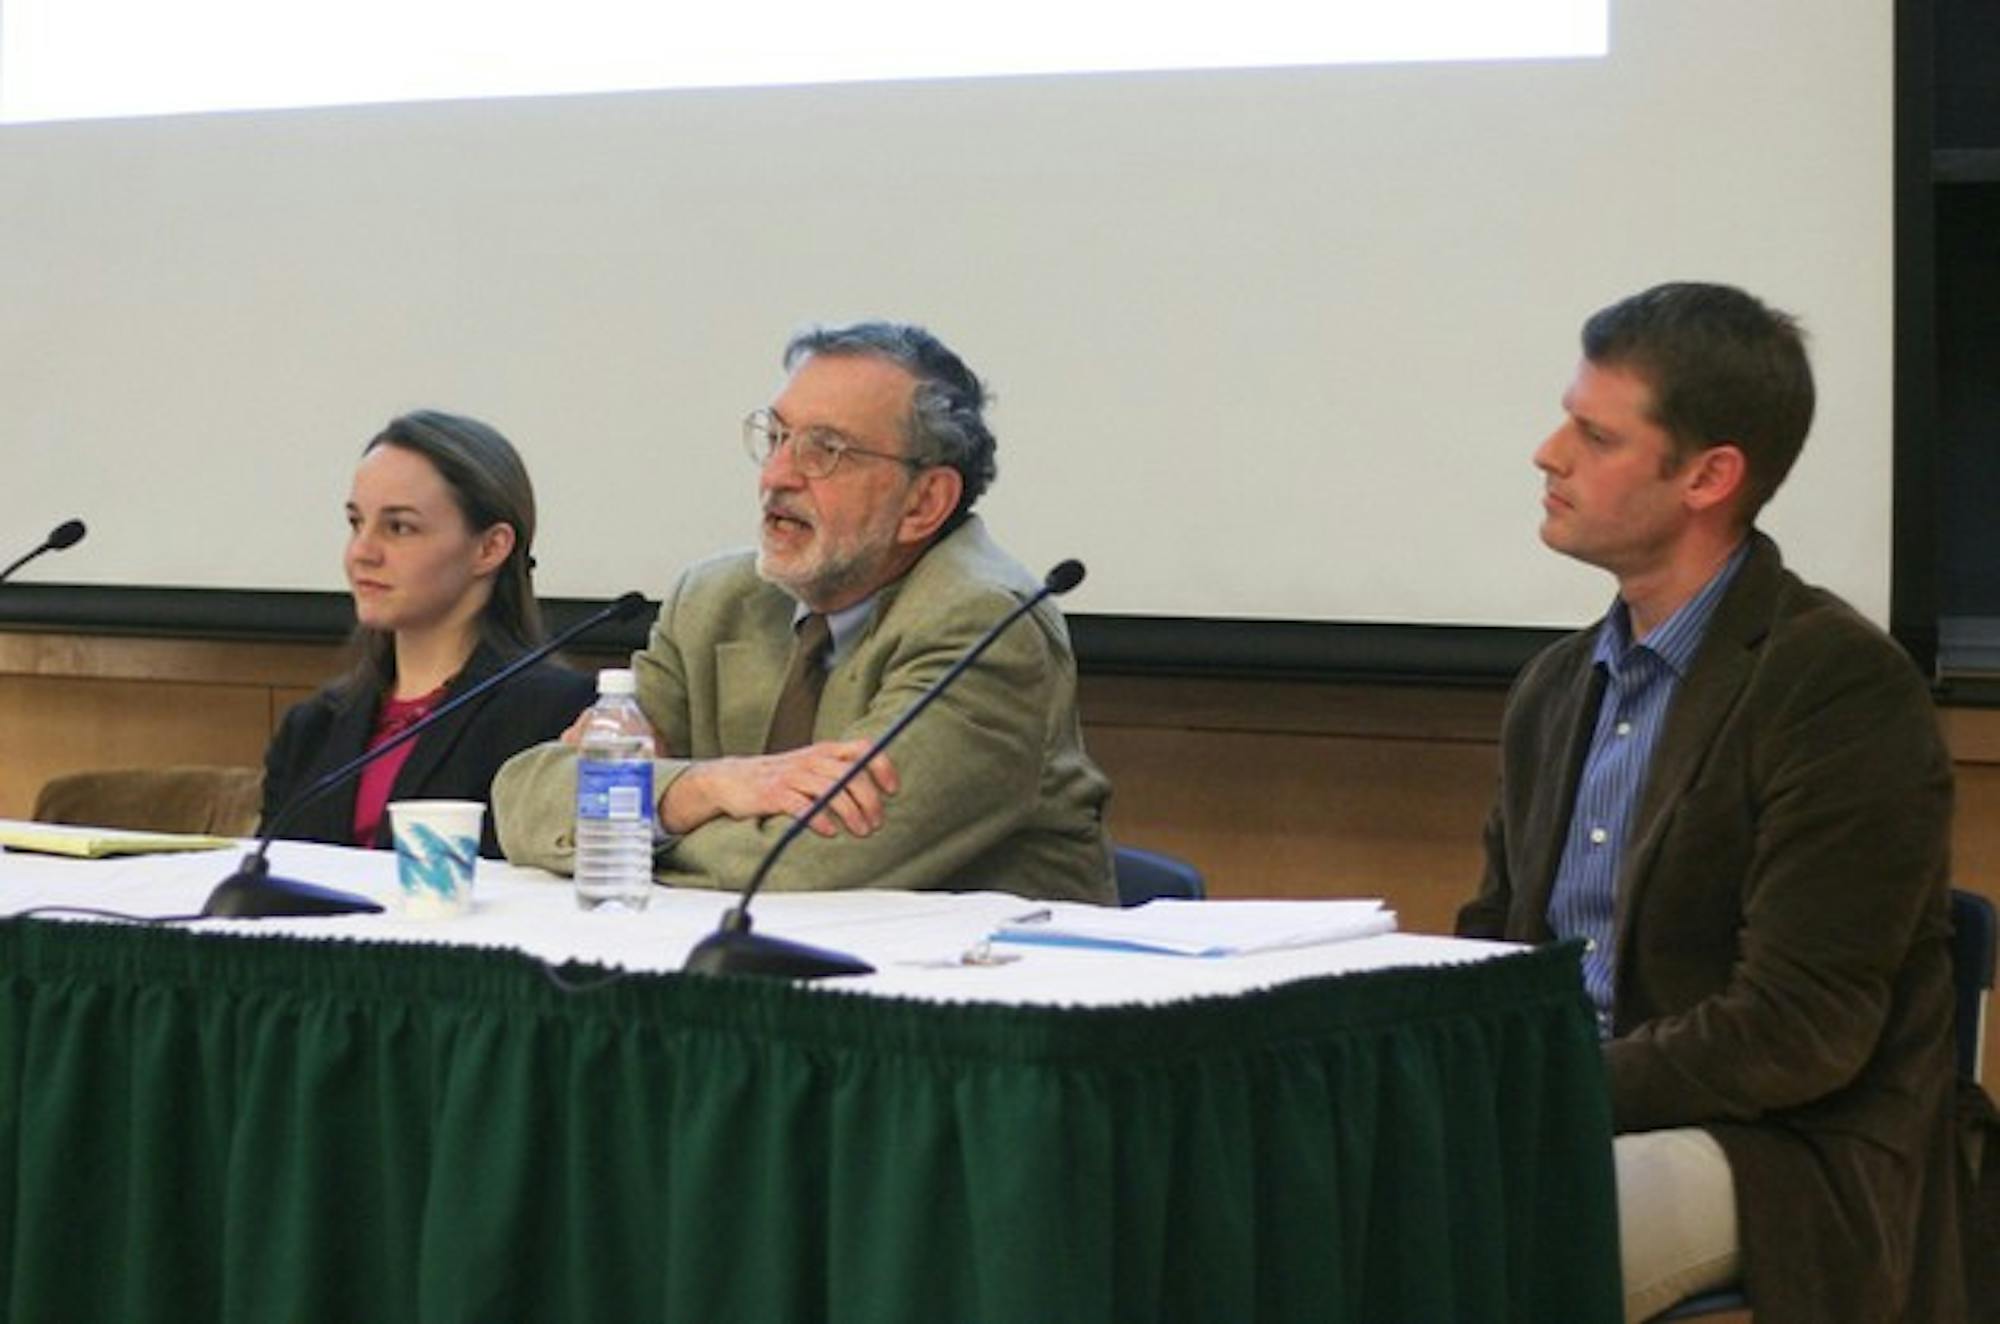 Dartmouth government professors discuss the conflict in Georgiaand U.S.-Russia relations in the Haldeman Center Friday.